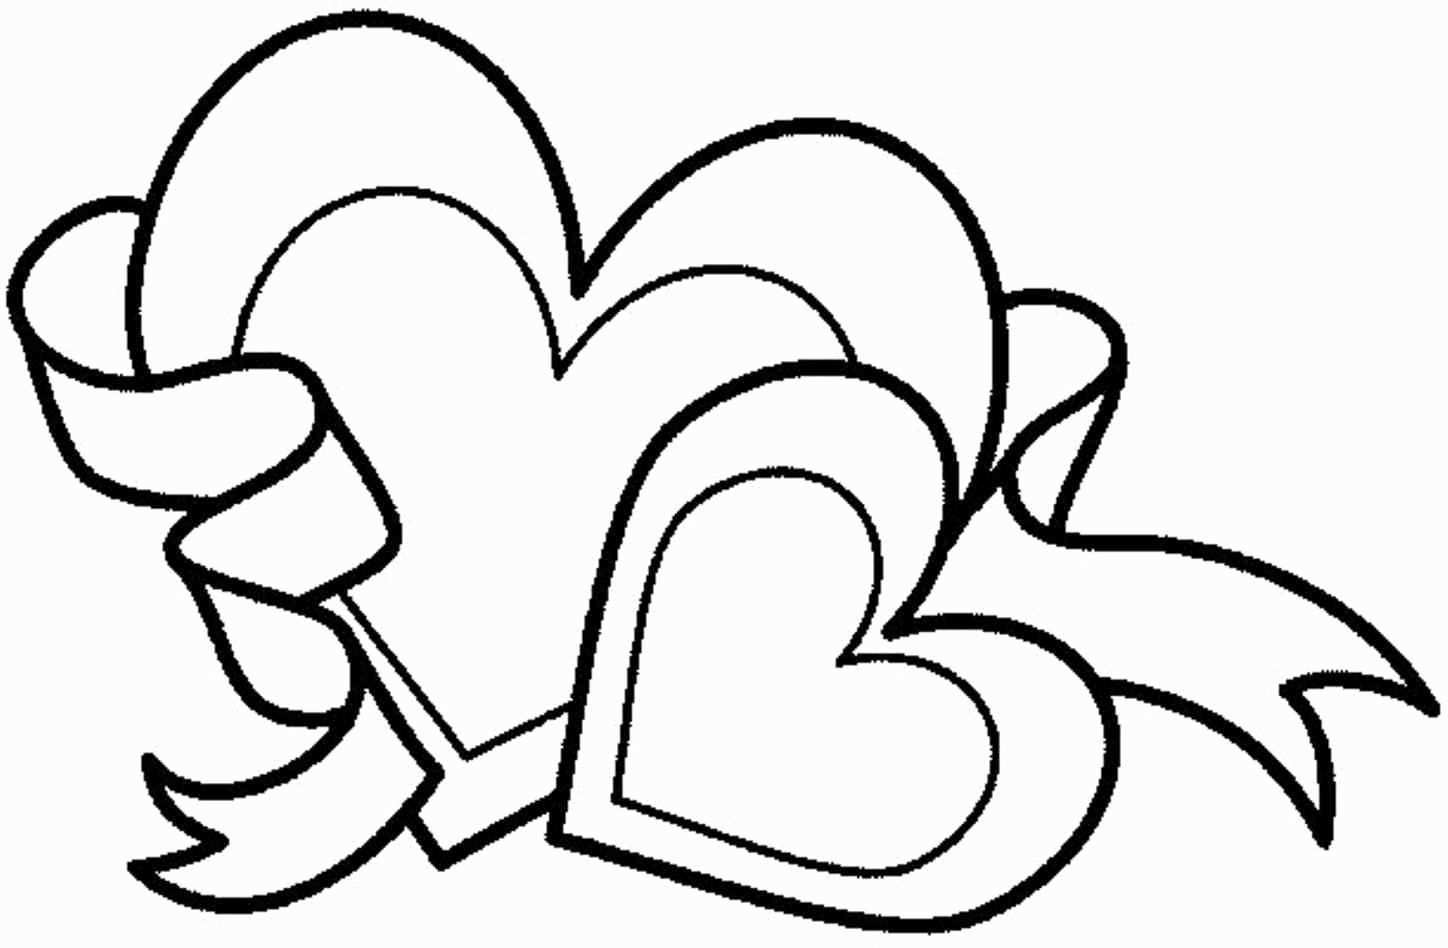 1448x948 50 New Pics Of Cute Animals Coloring Pages Valentine Coloring Pages Heart Coloring Pages Valentine Coloring